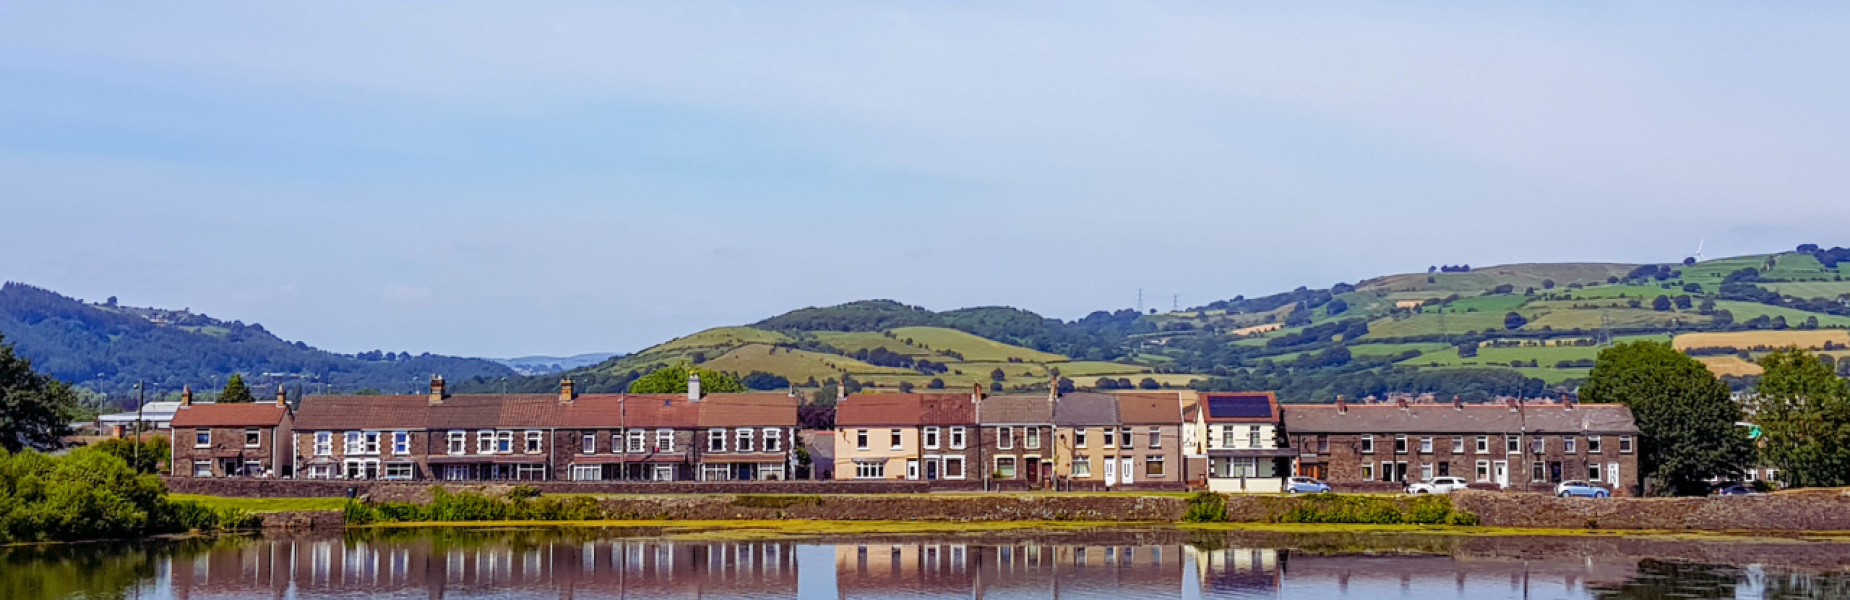 town houses in Caerphilly